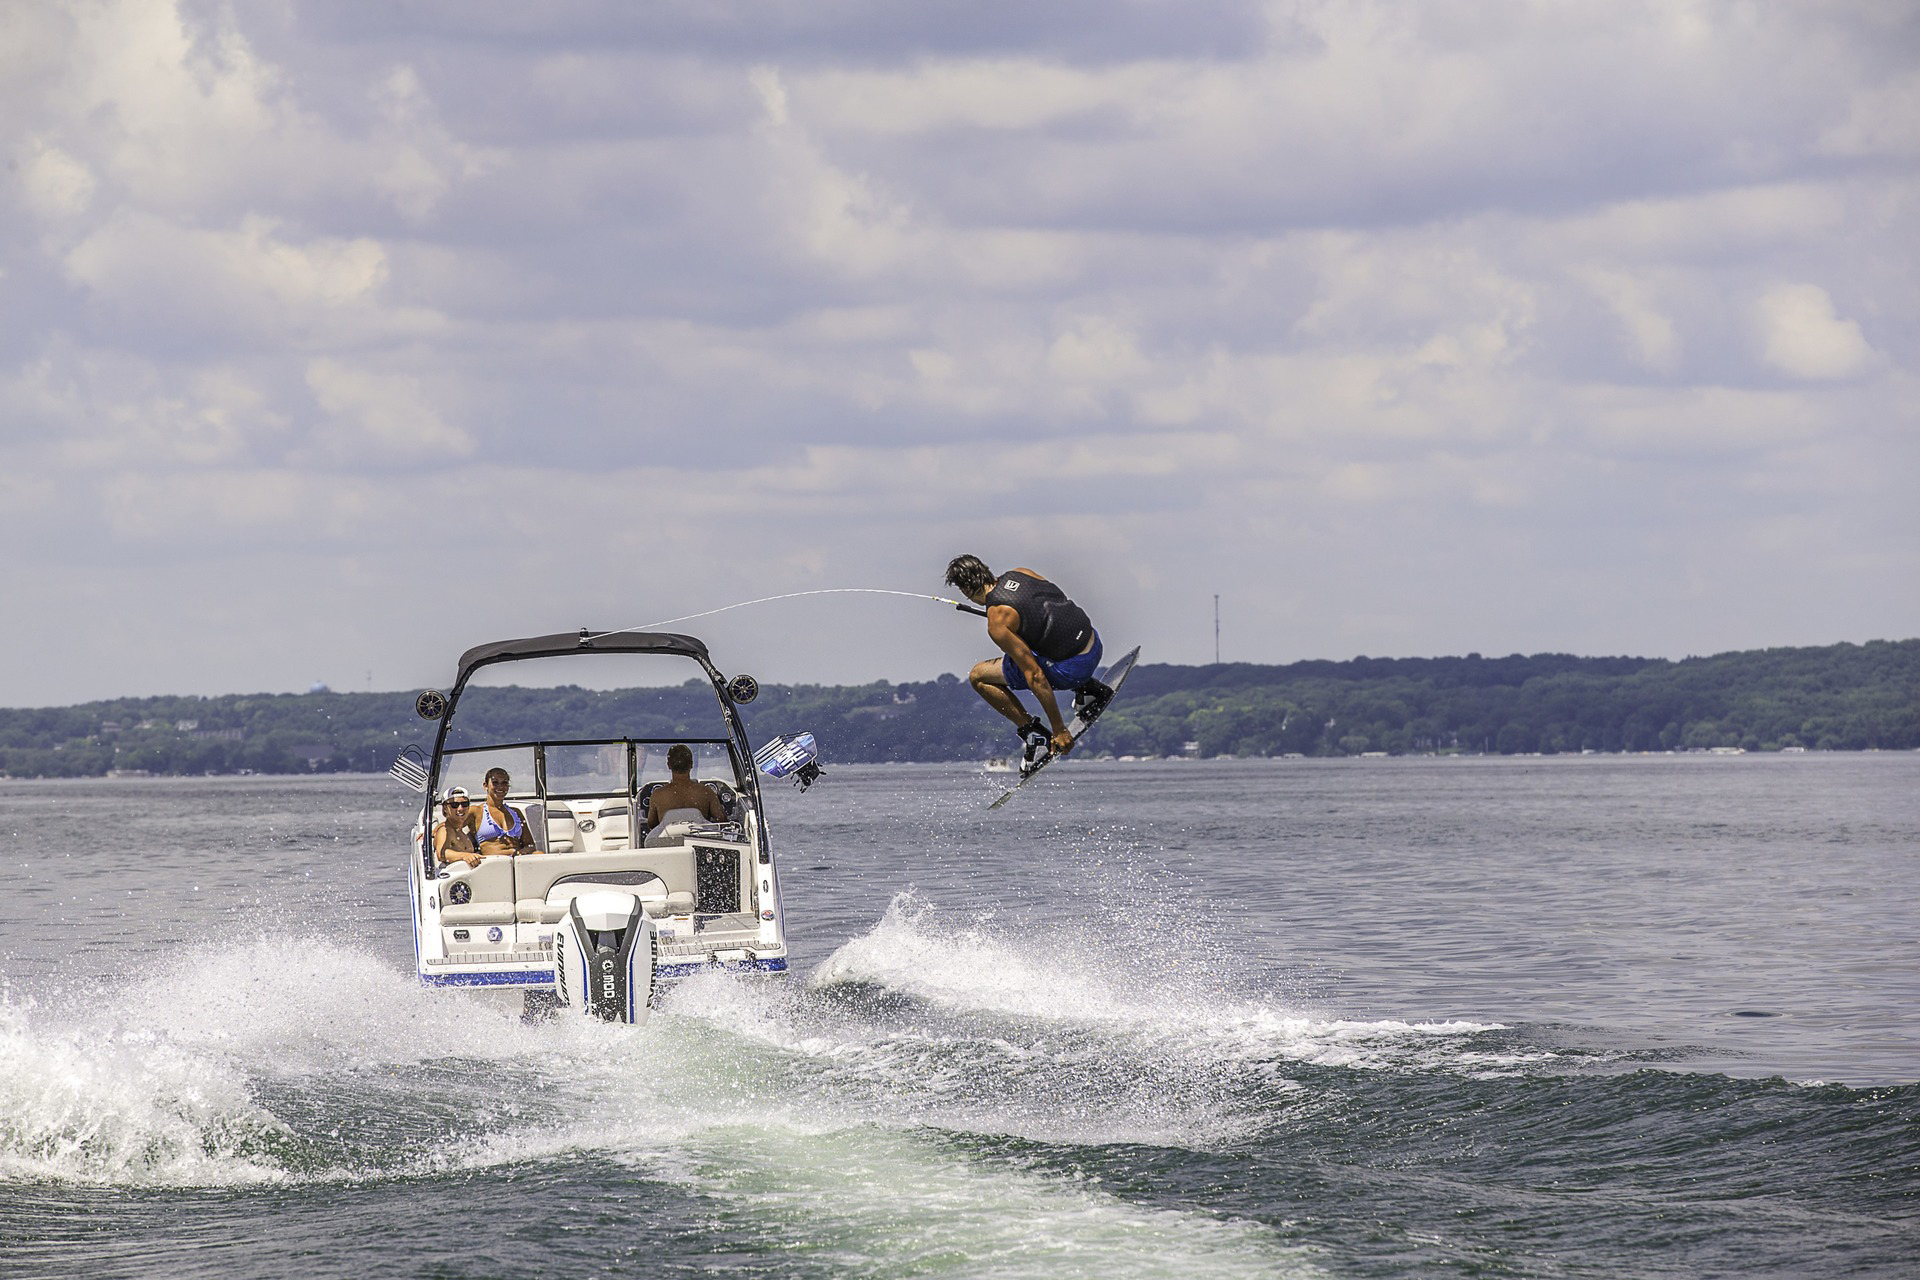 Watersport and wakeboarding safety